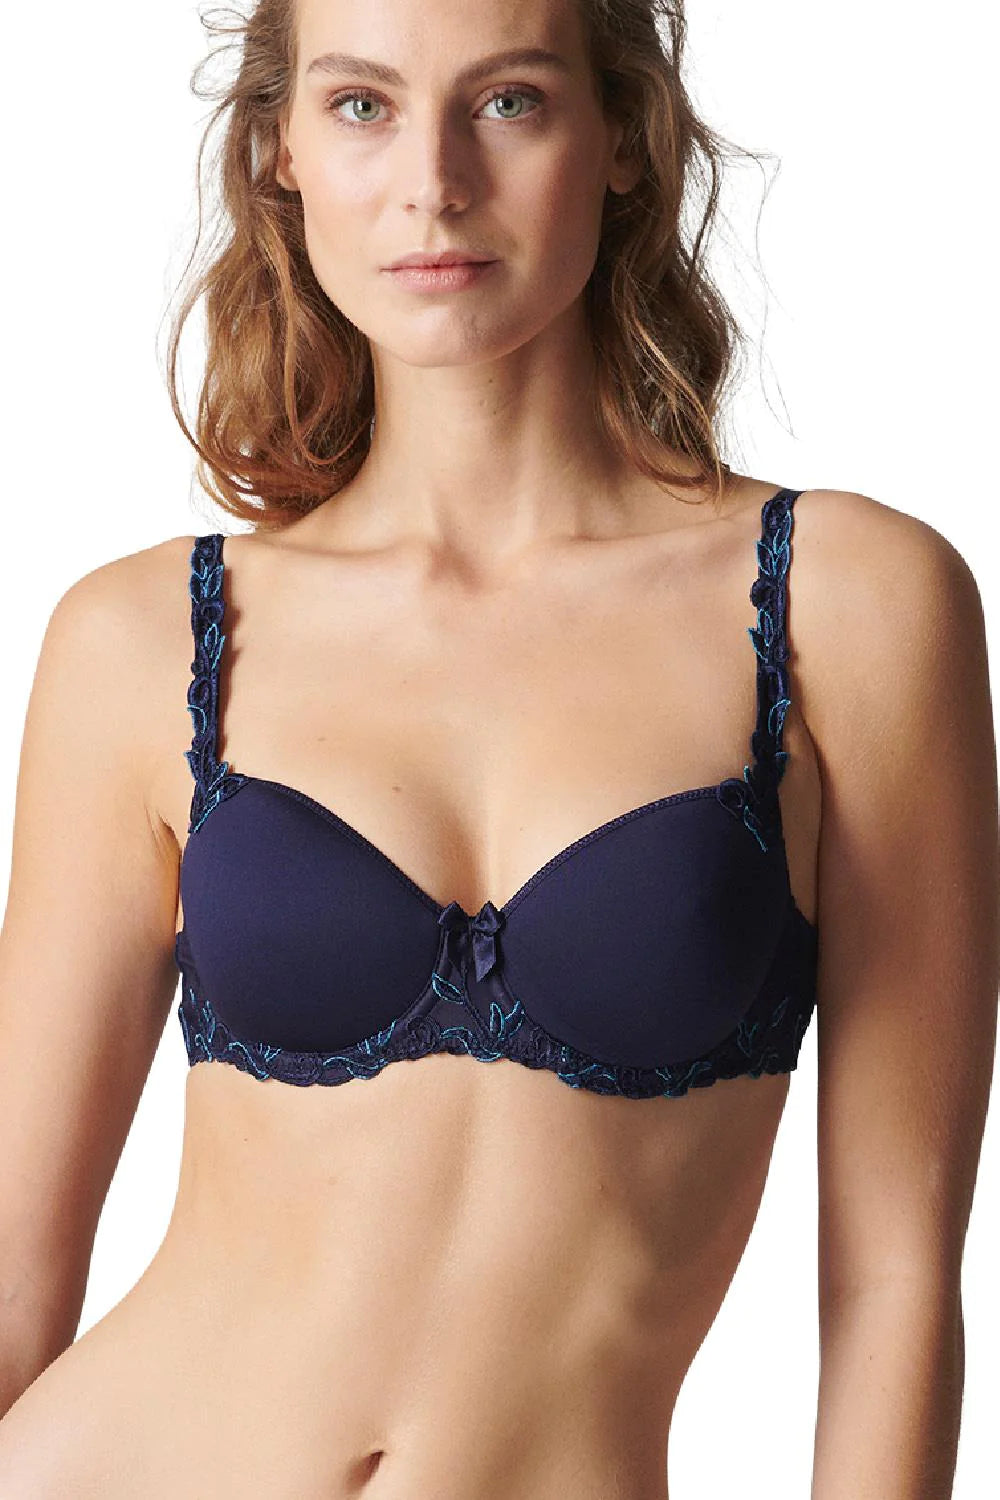 Simone Perele: buy brand products at Bralissimo - Canada and U.S. delivery